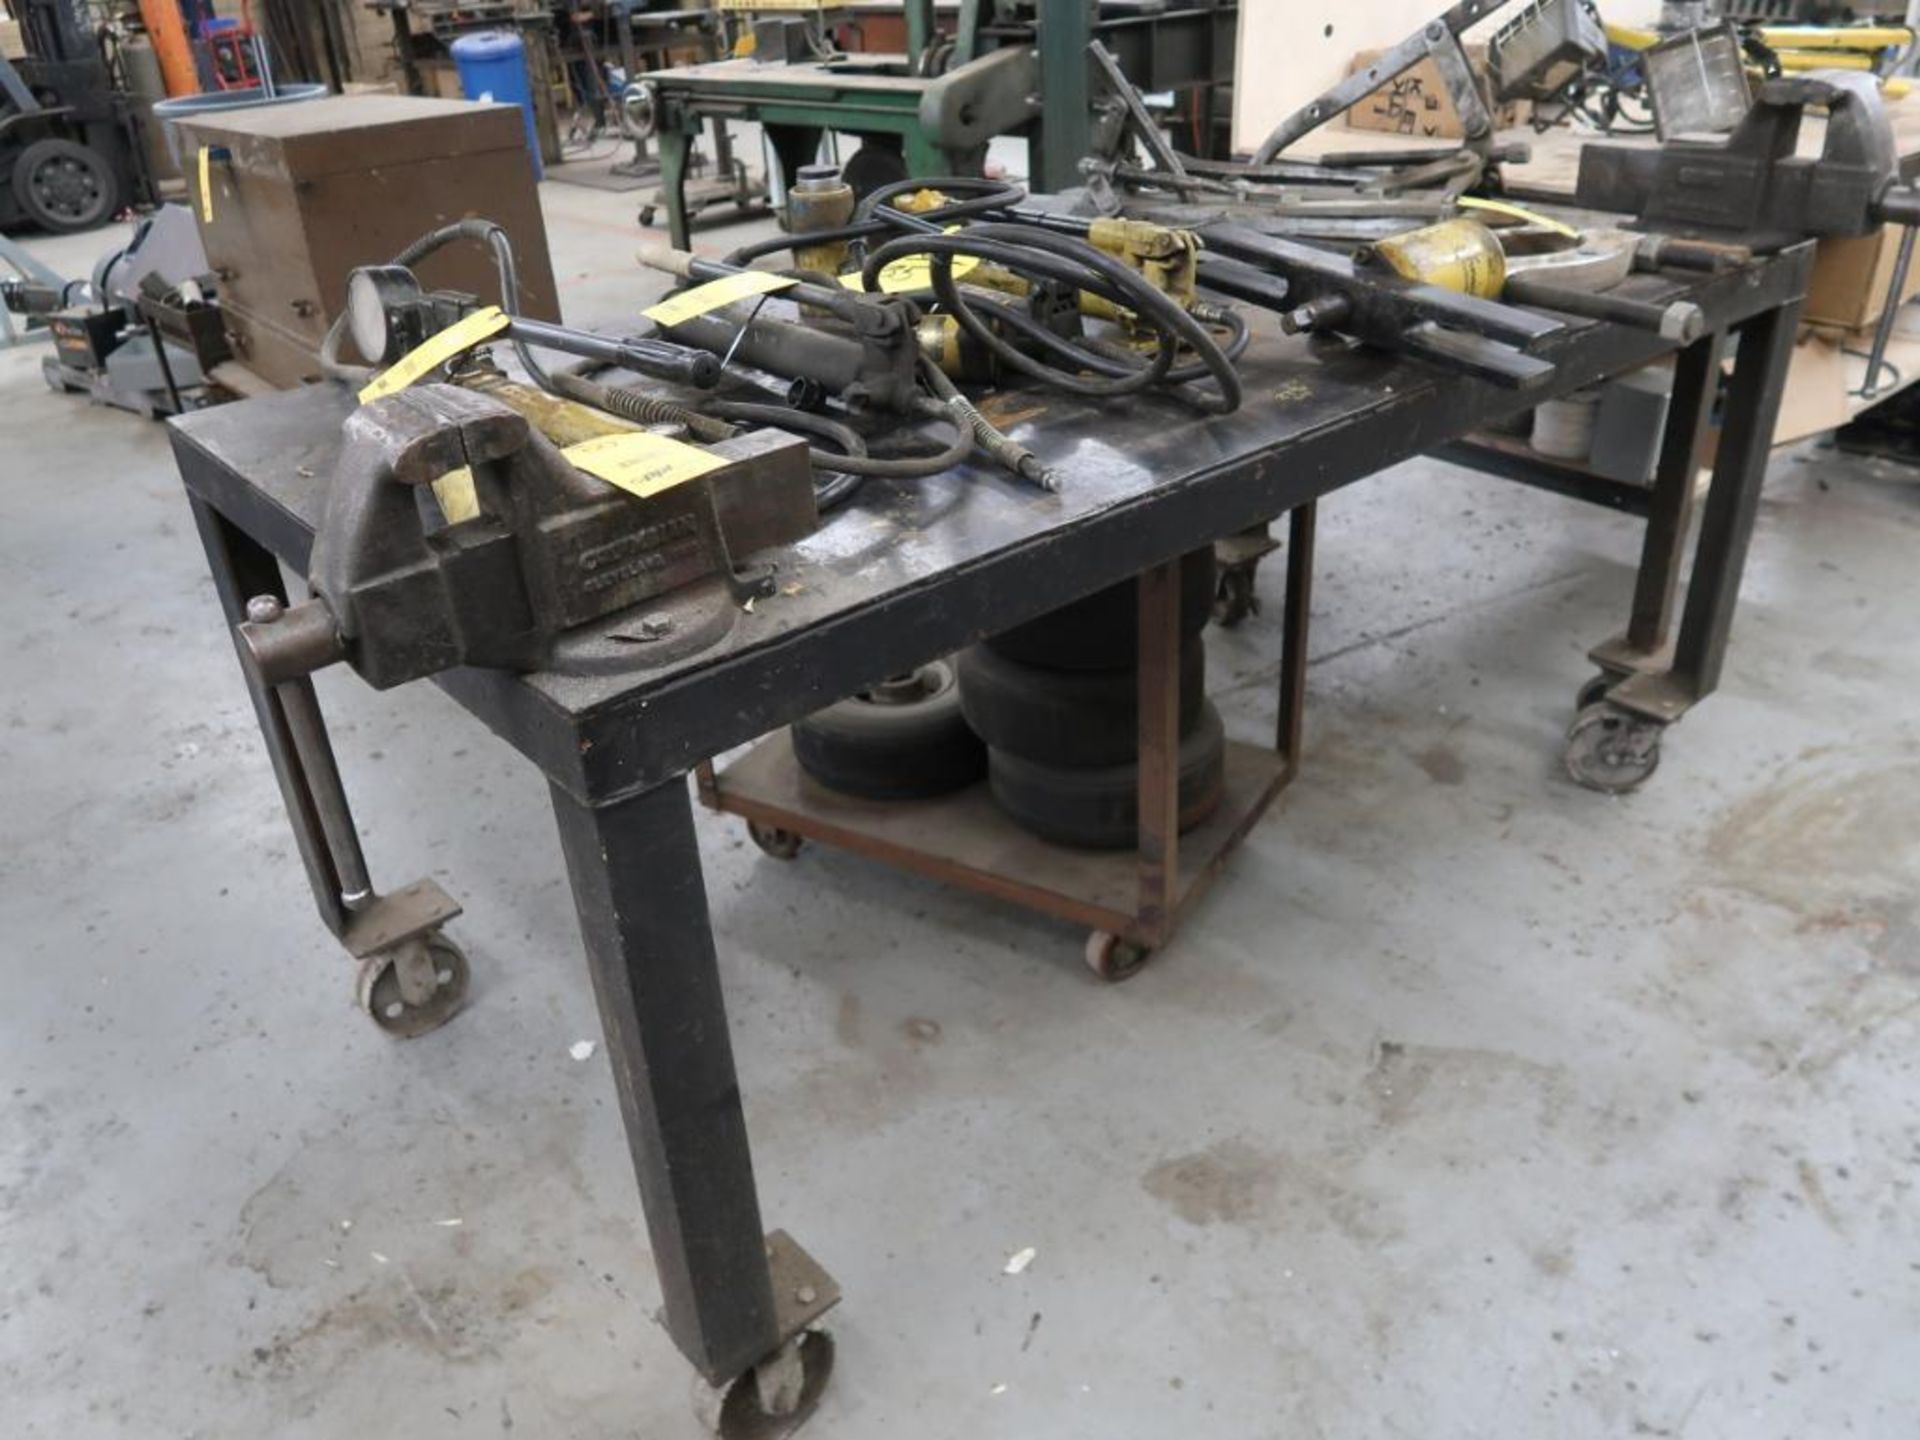 LOT: (2) Portable Steel Work Tables with (1) 4 in. Vise & (1) 4-1/2 in. Vise